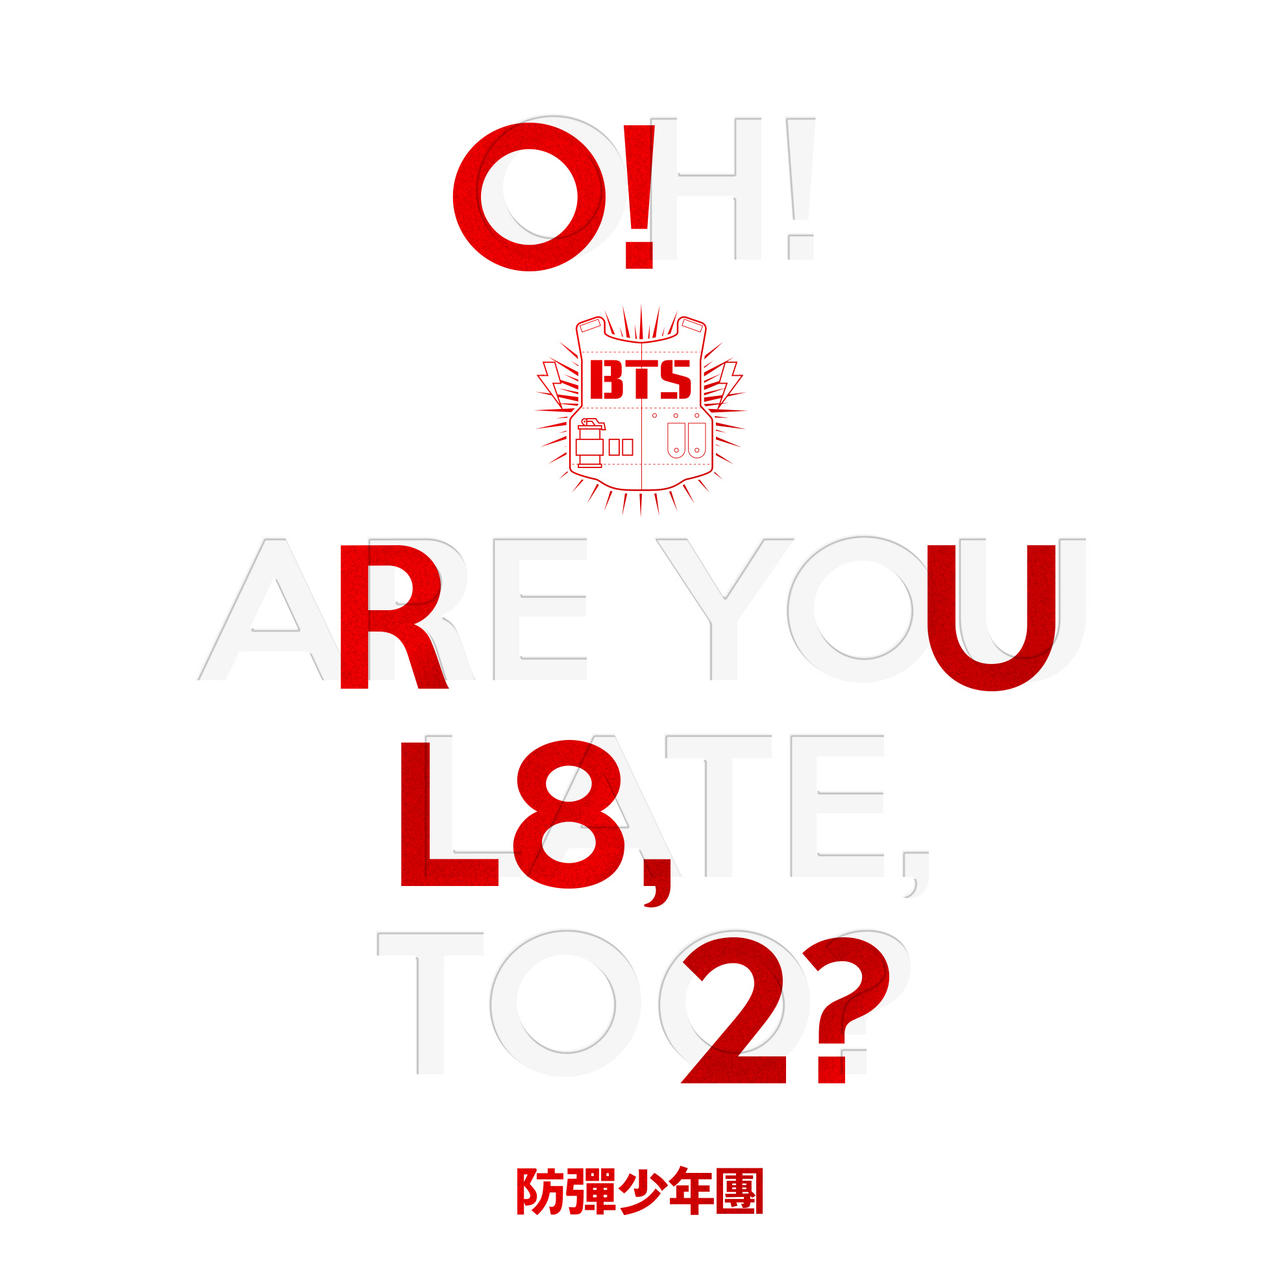 BTS O! RUL8,2? Album Cover by FavoriteThings on DeviantArt